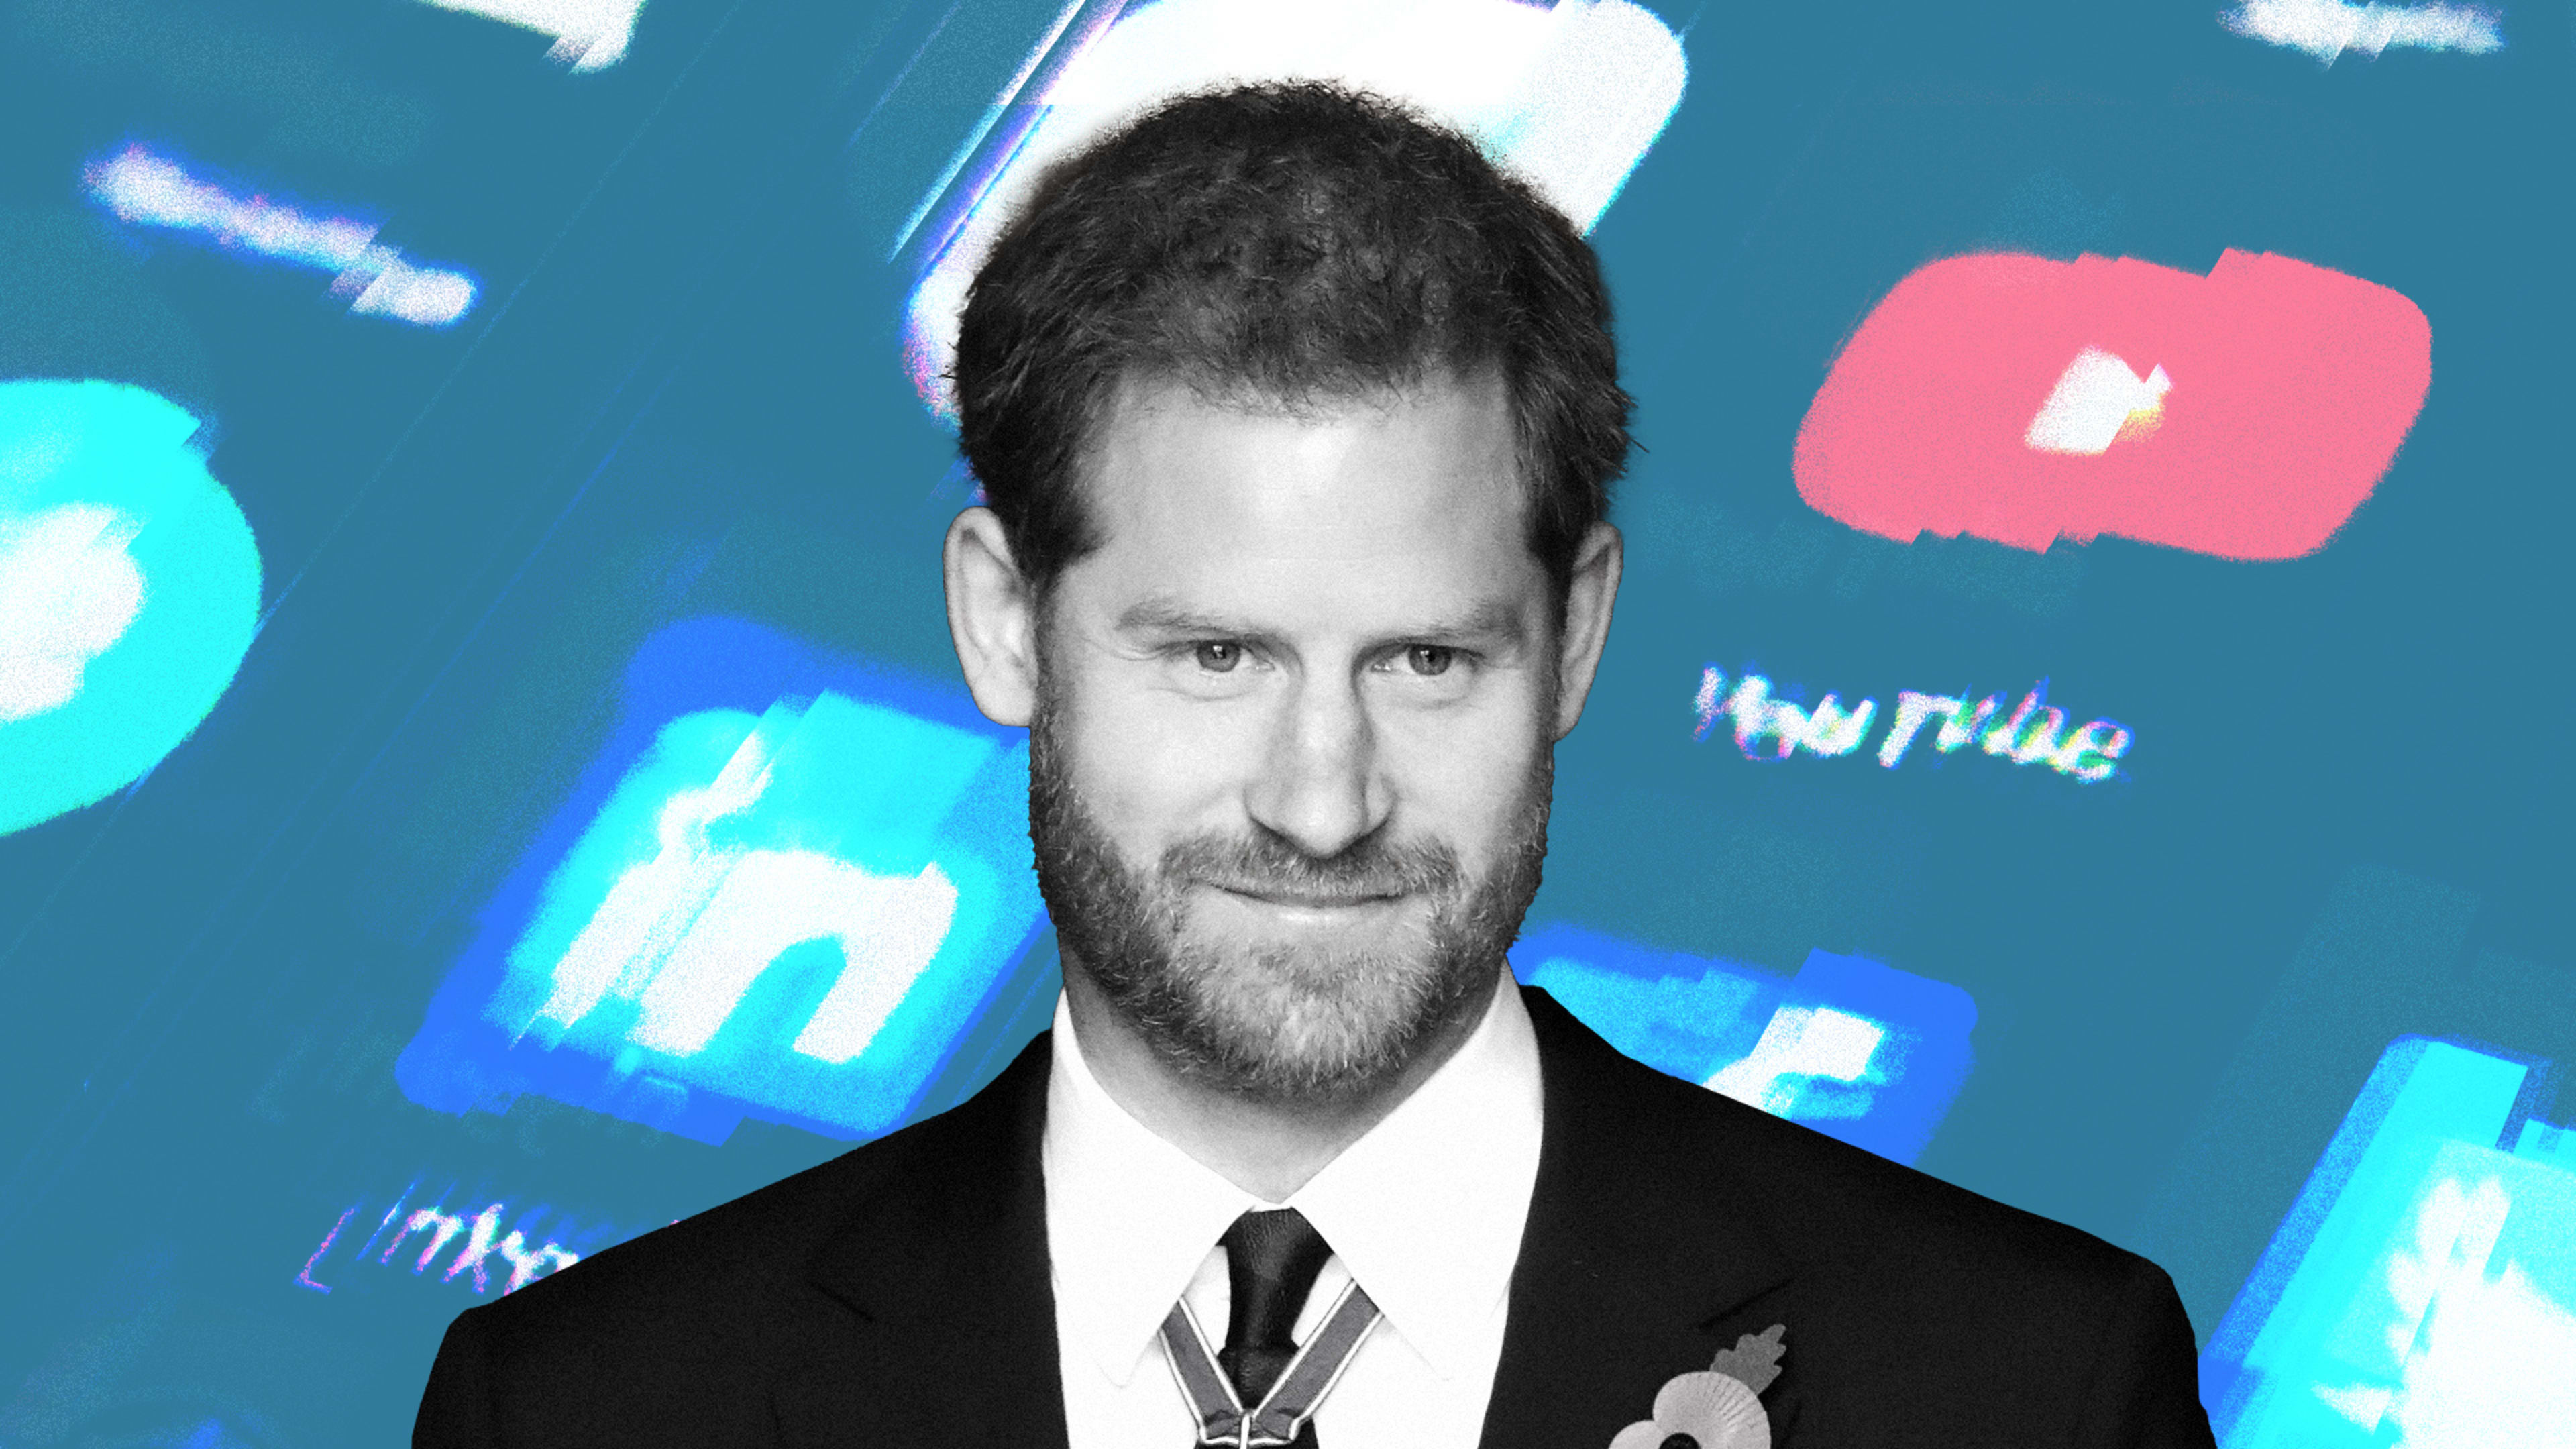 Prince Harry: Social media is dividing us. Together, we can redesign it